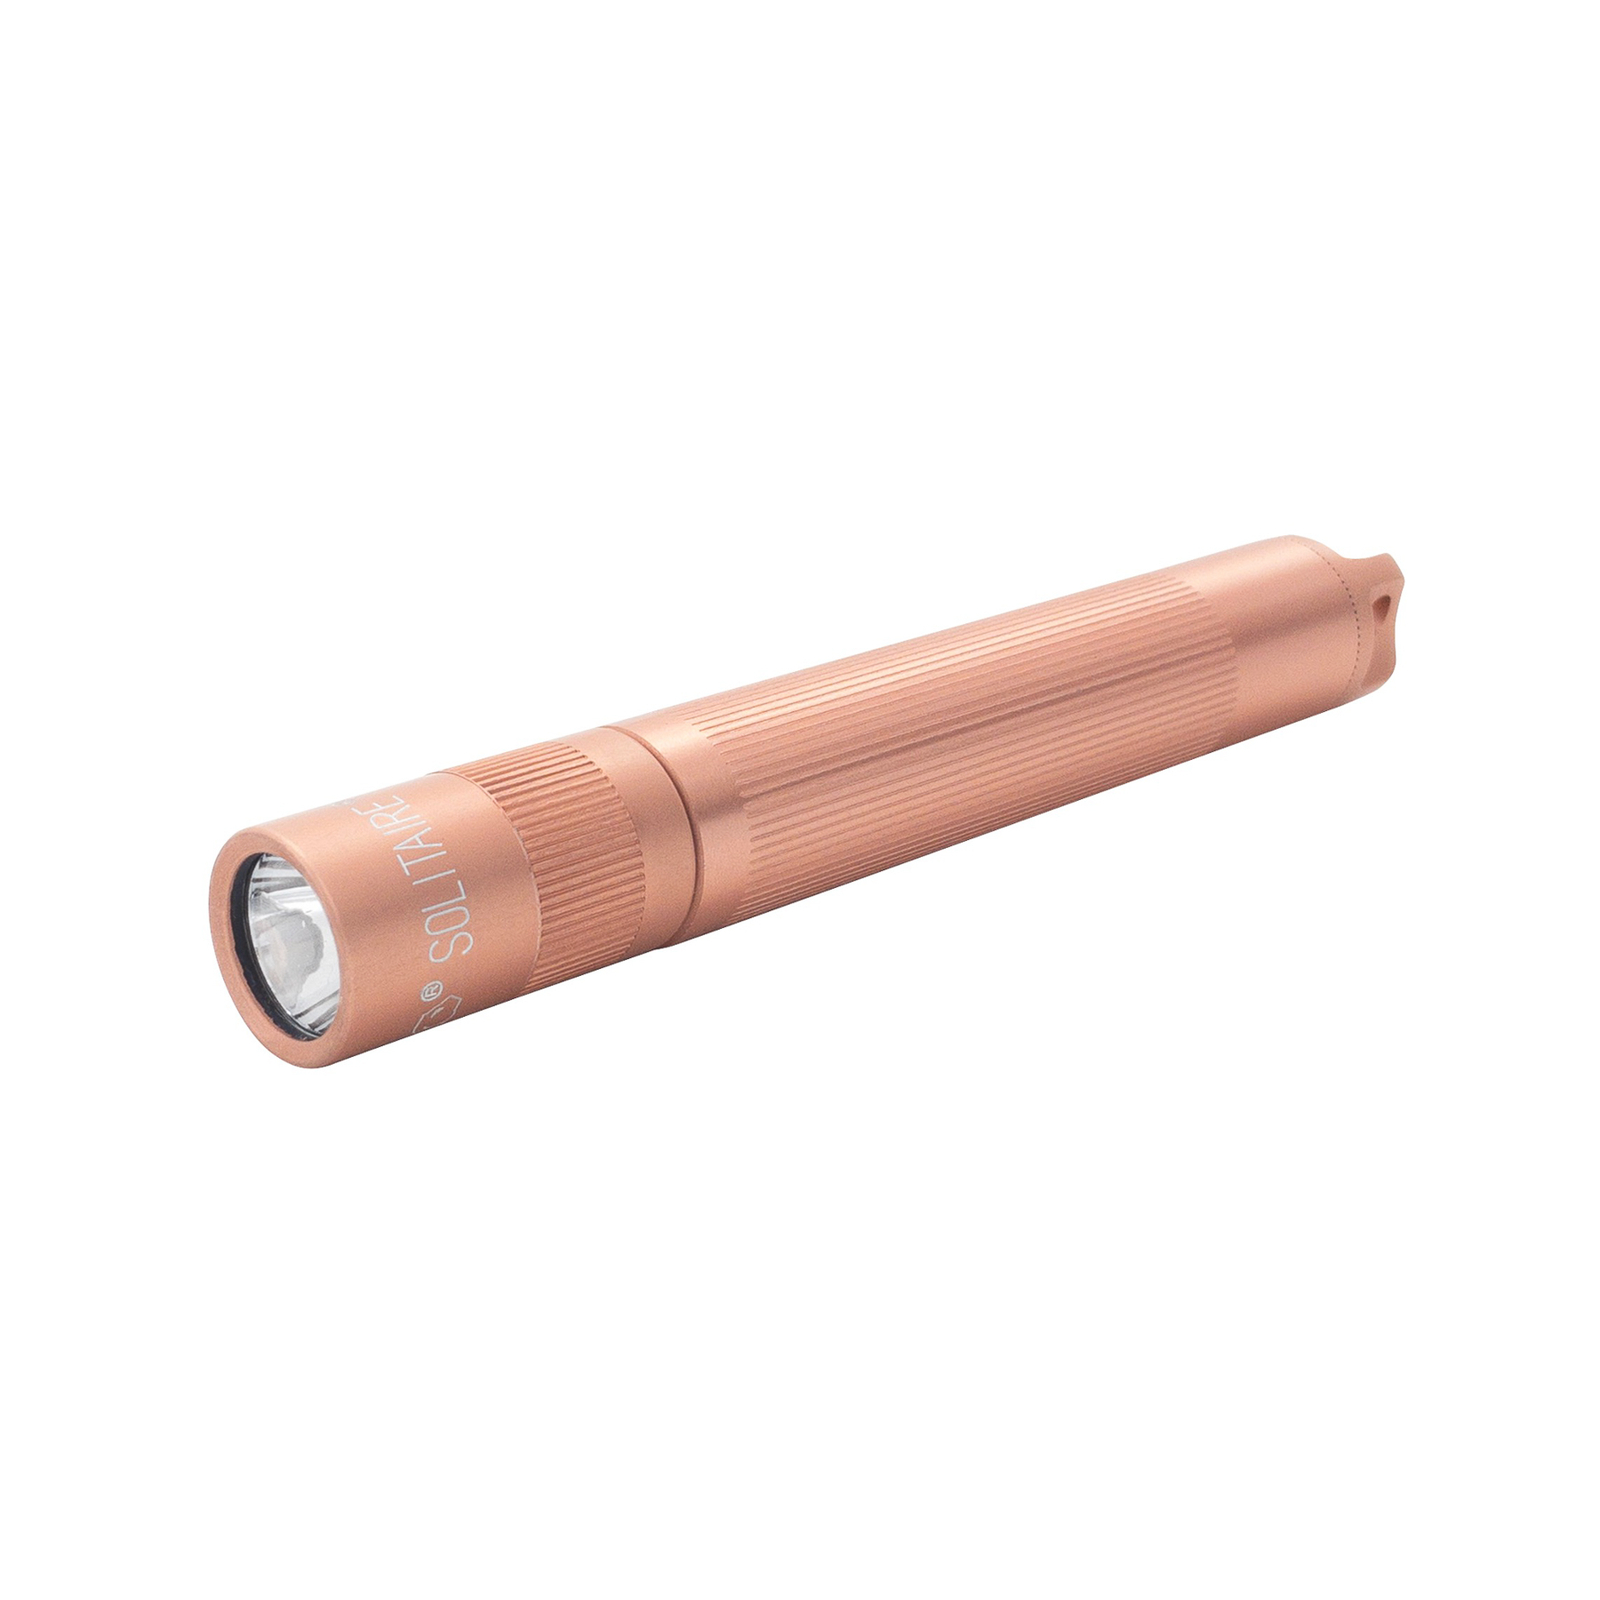 Maglite LED-ficklampa Solitaire, 1-cell AAA, ask, rosé